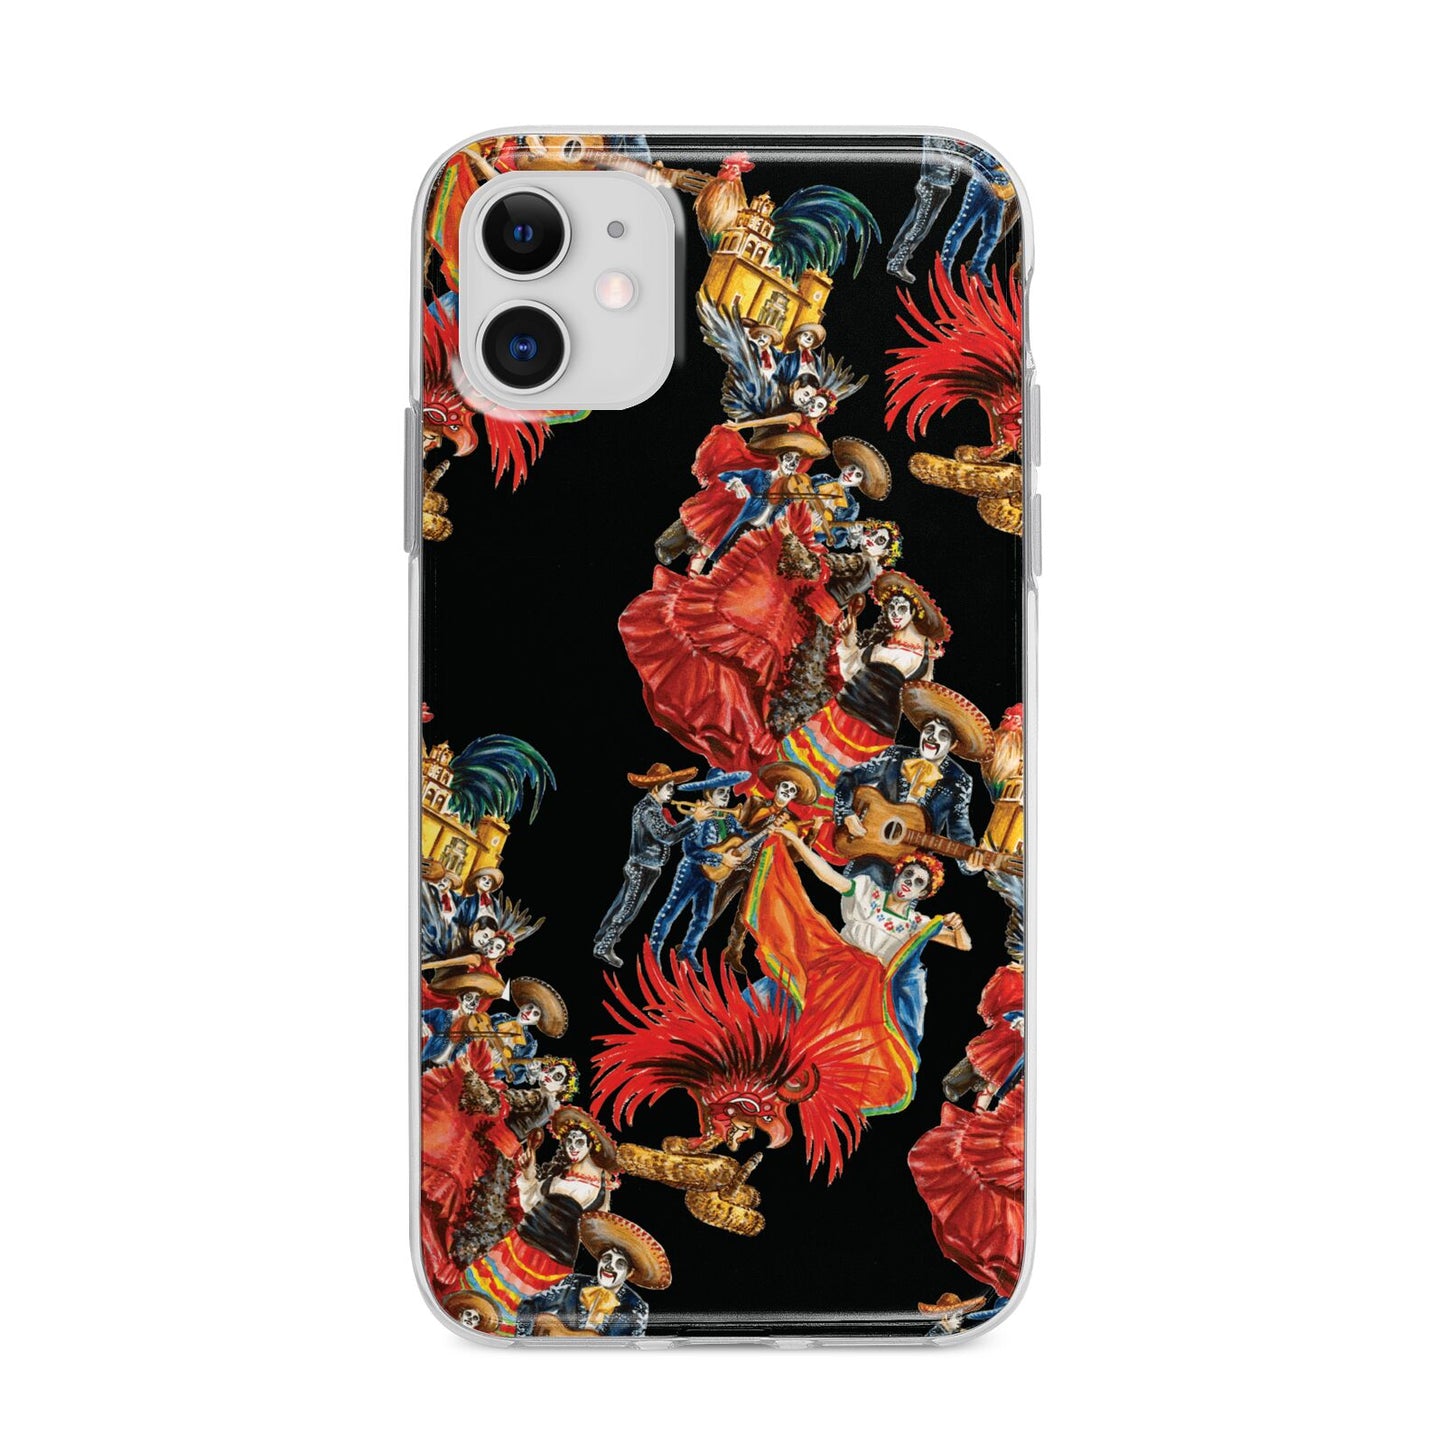 Day of the Dead Festival Apple iPhone 11 in White with Bumper Case